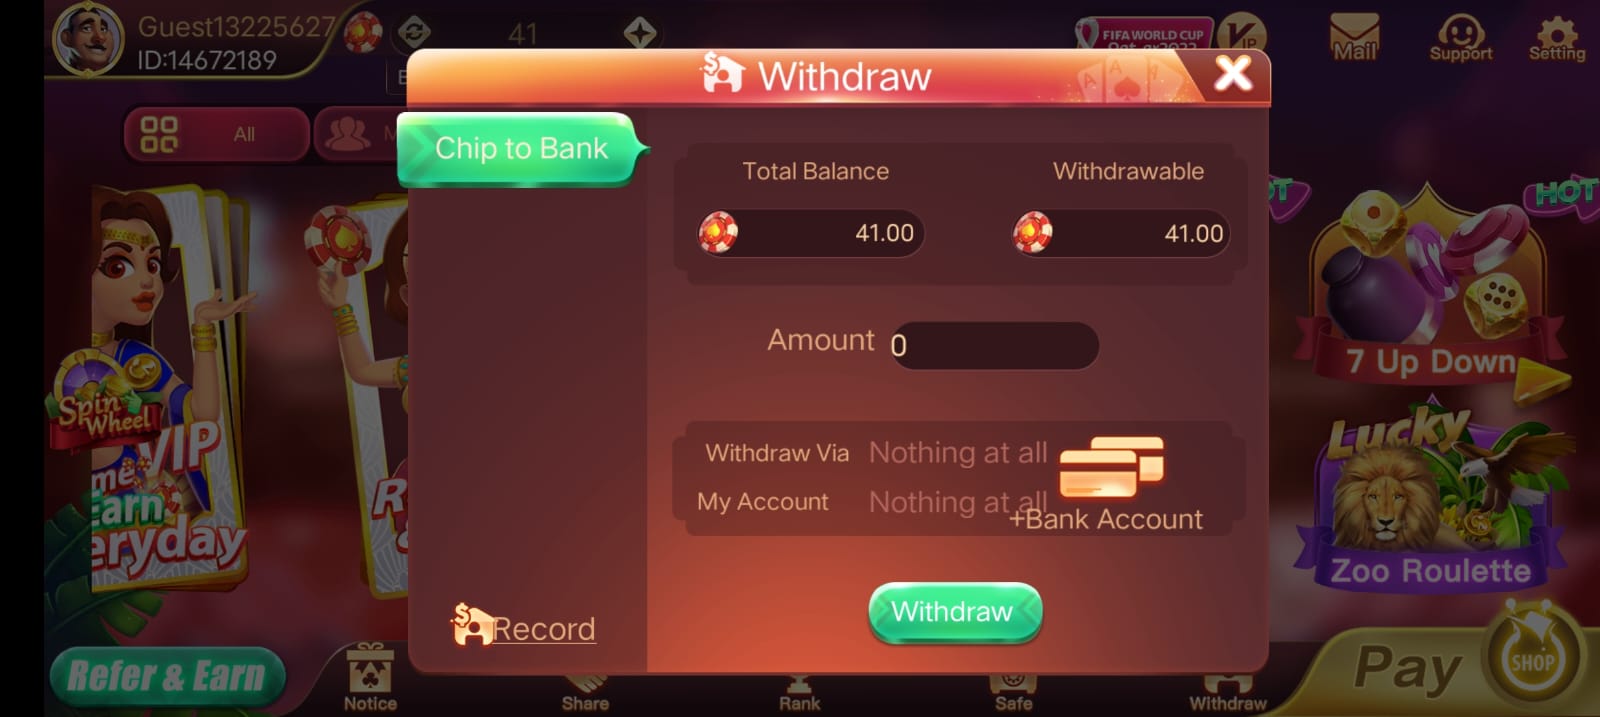 Withdrawal In Teen Patti Yes App